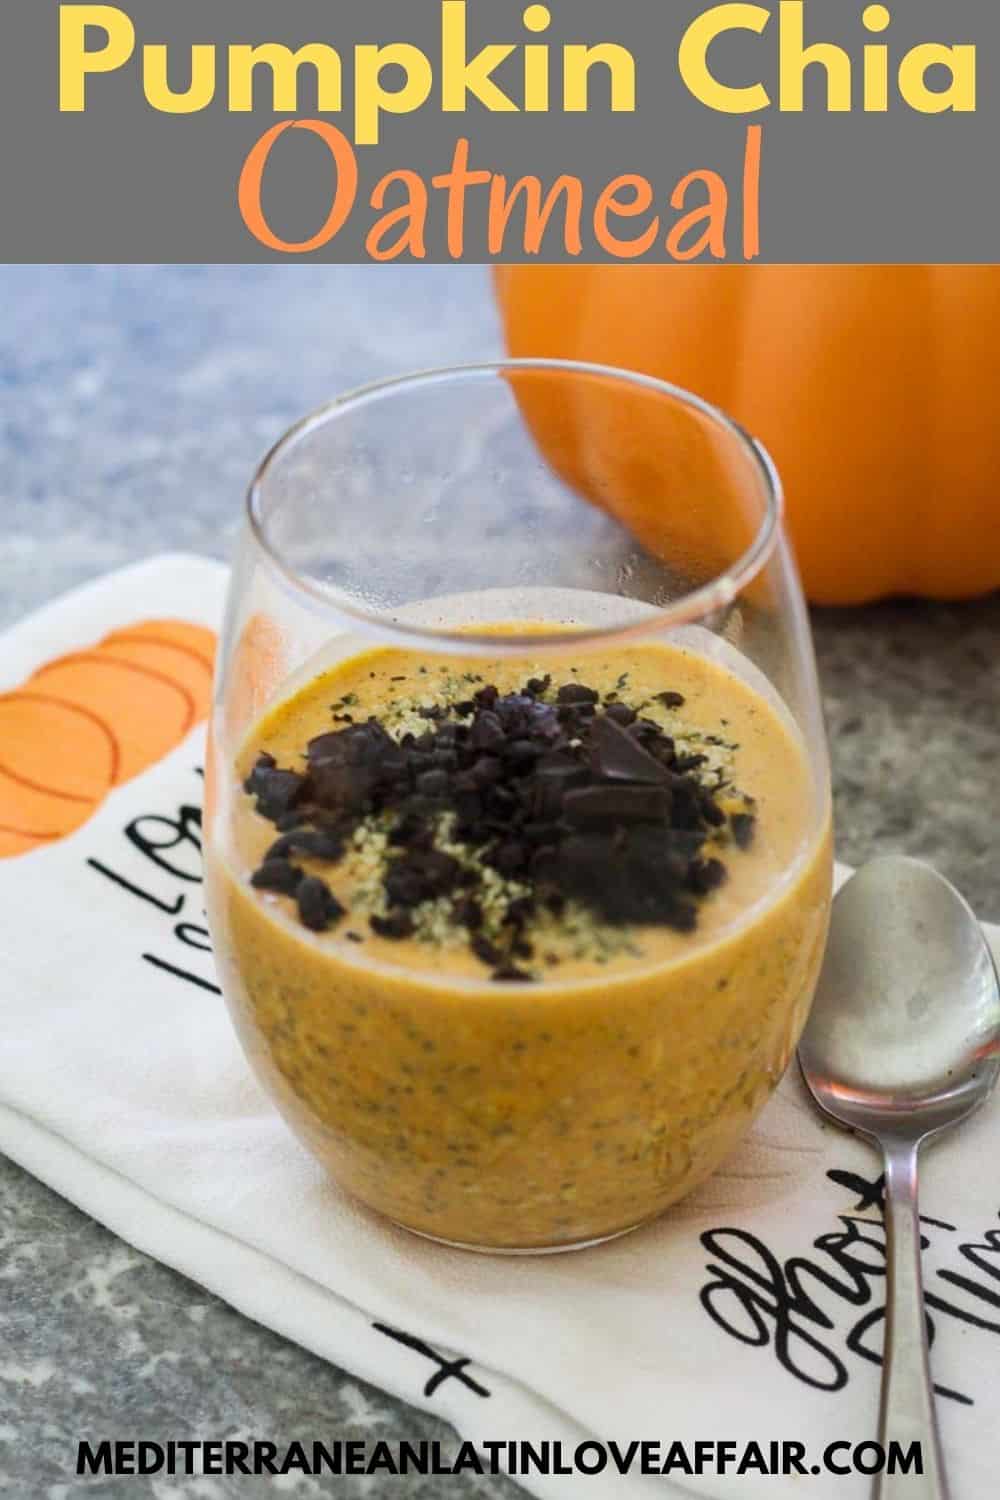 Pumpkin Chia Oatmeal topped with dark chocolate. Oatmeal is served over a clear glass placed on a towel, next to a spoon. Image has a title bar and the website link at the bottom.